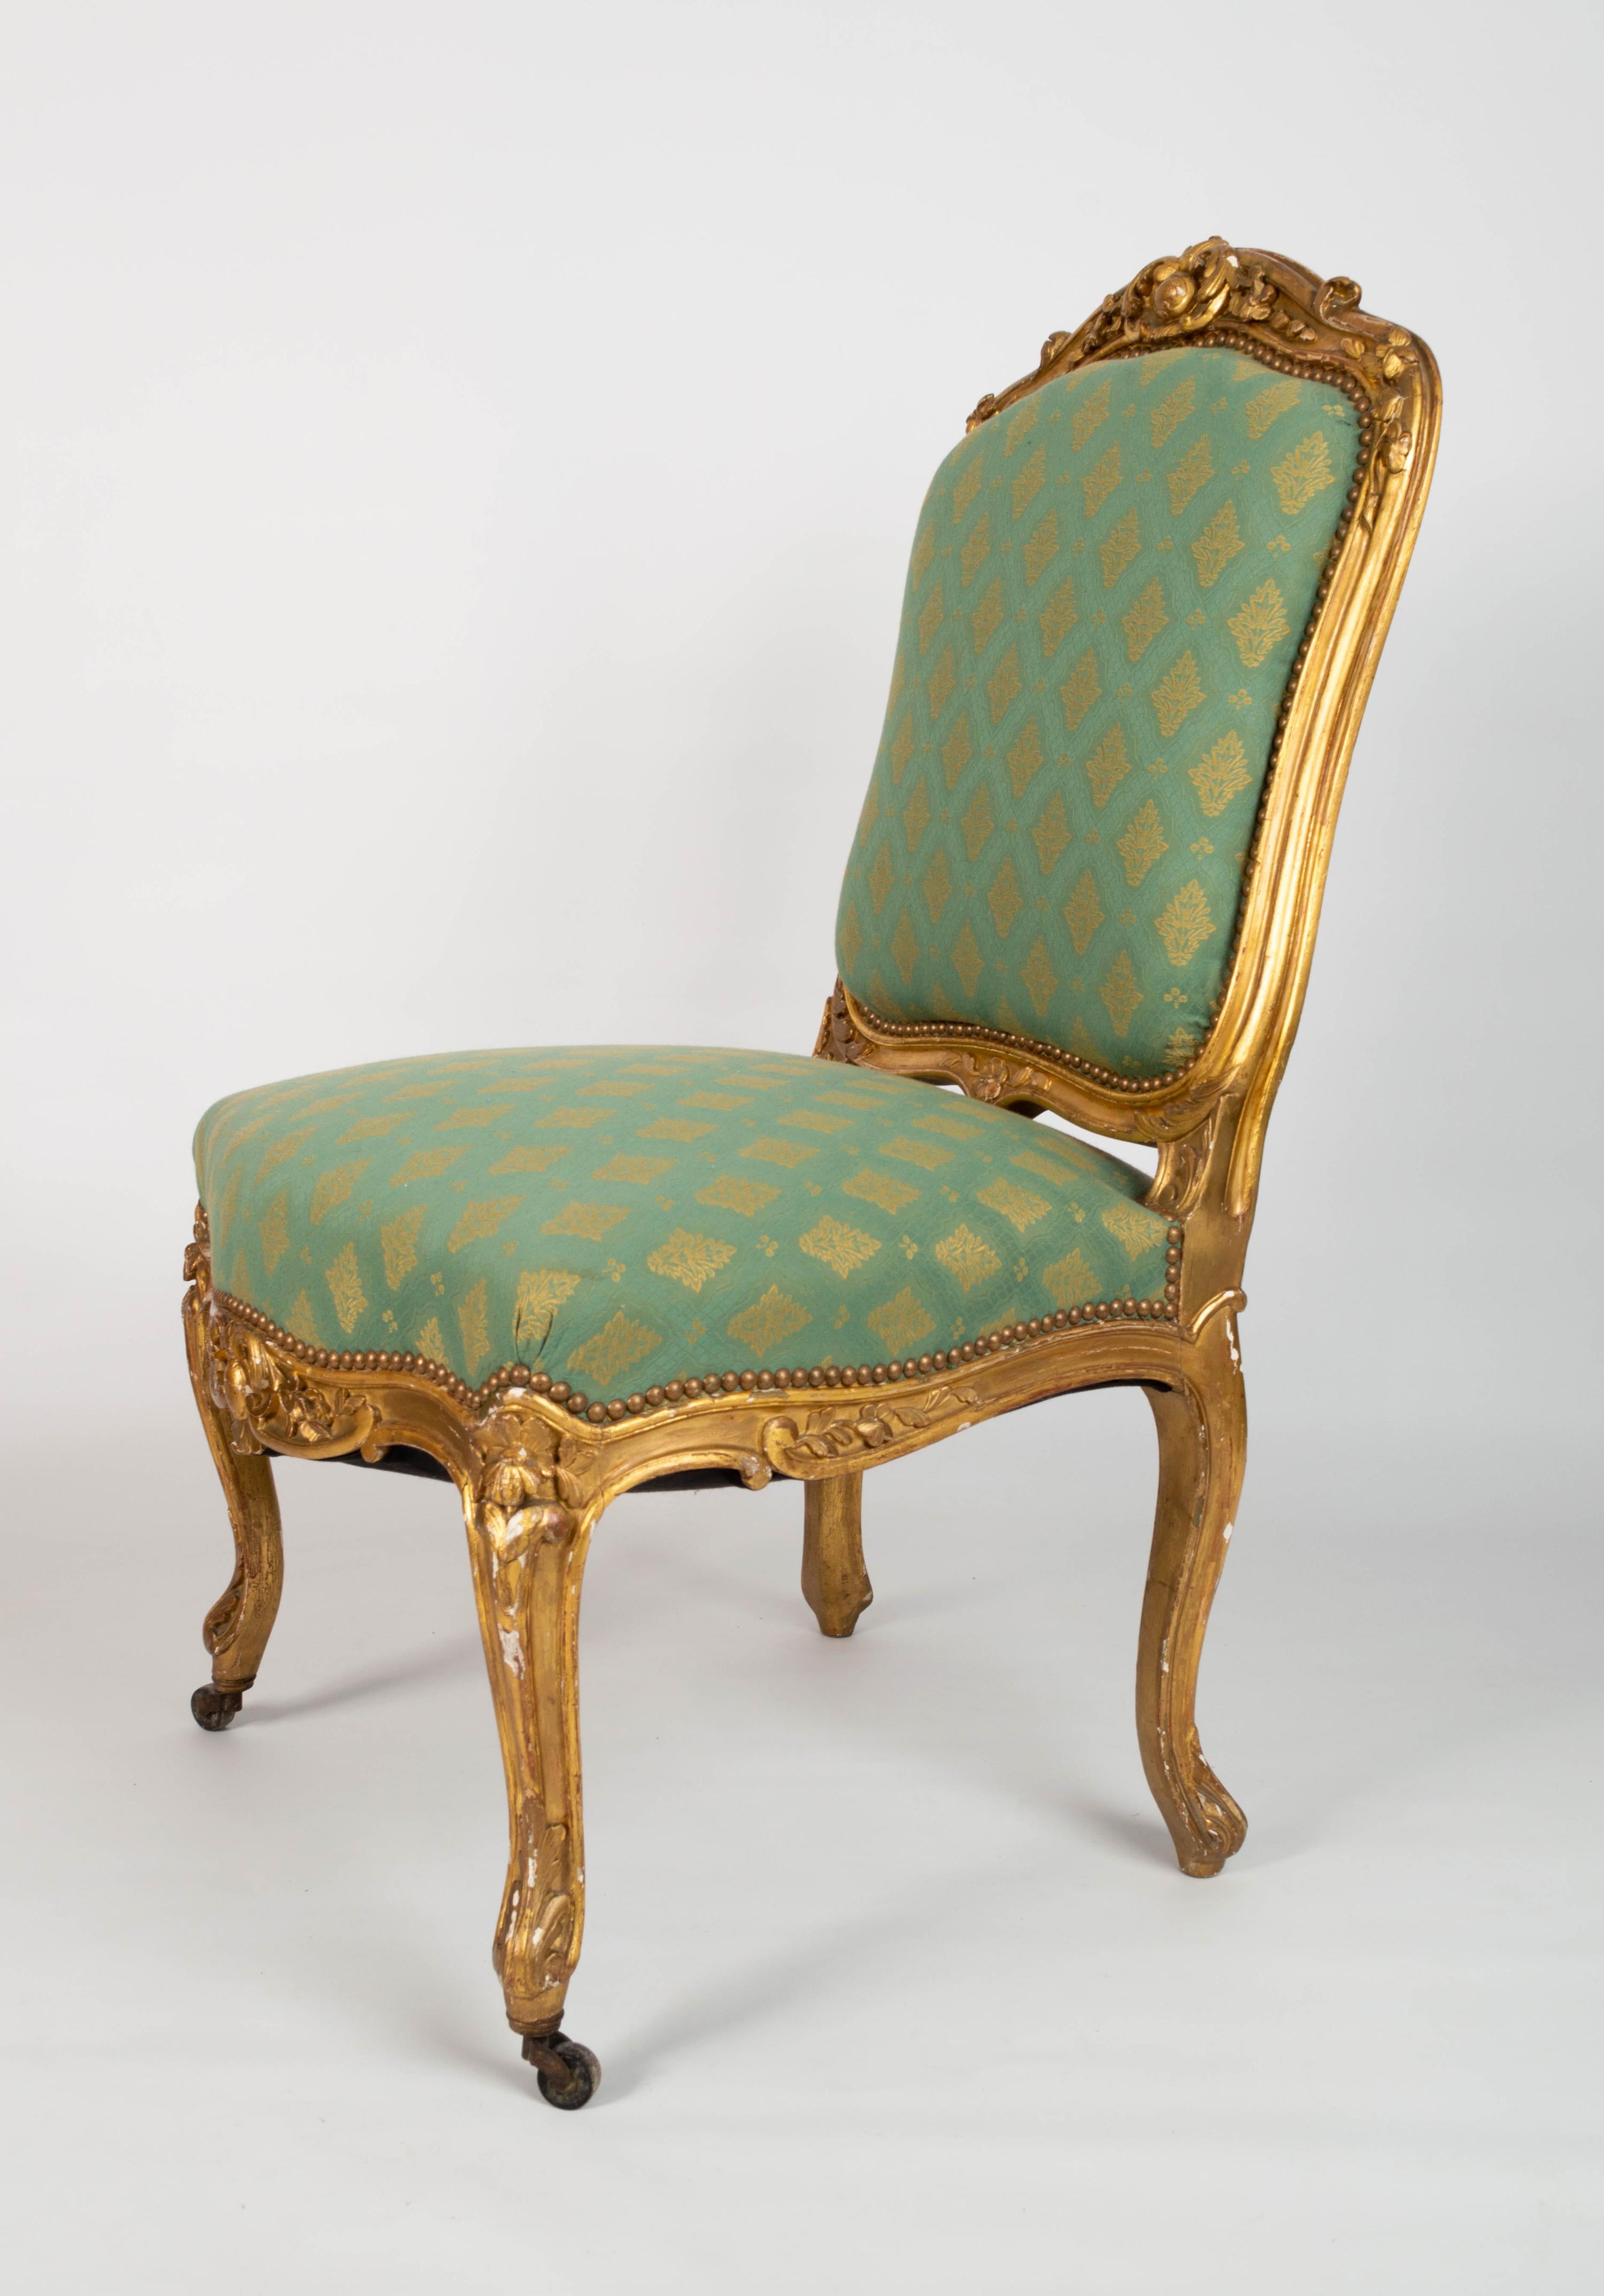 Pair Antique French 19th Century Louis XV Style Giltwood Salon Chairs C.1870 For Sale 6